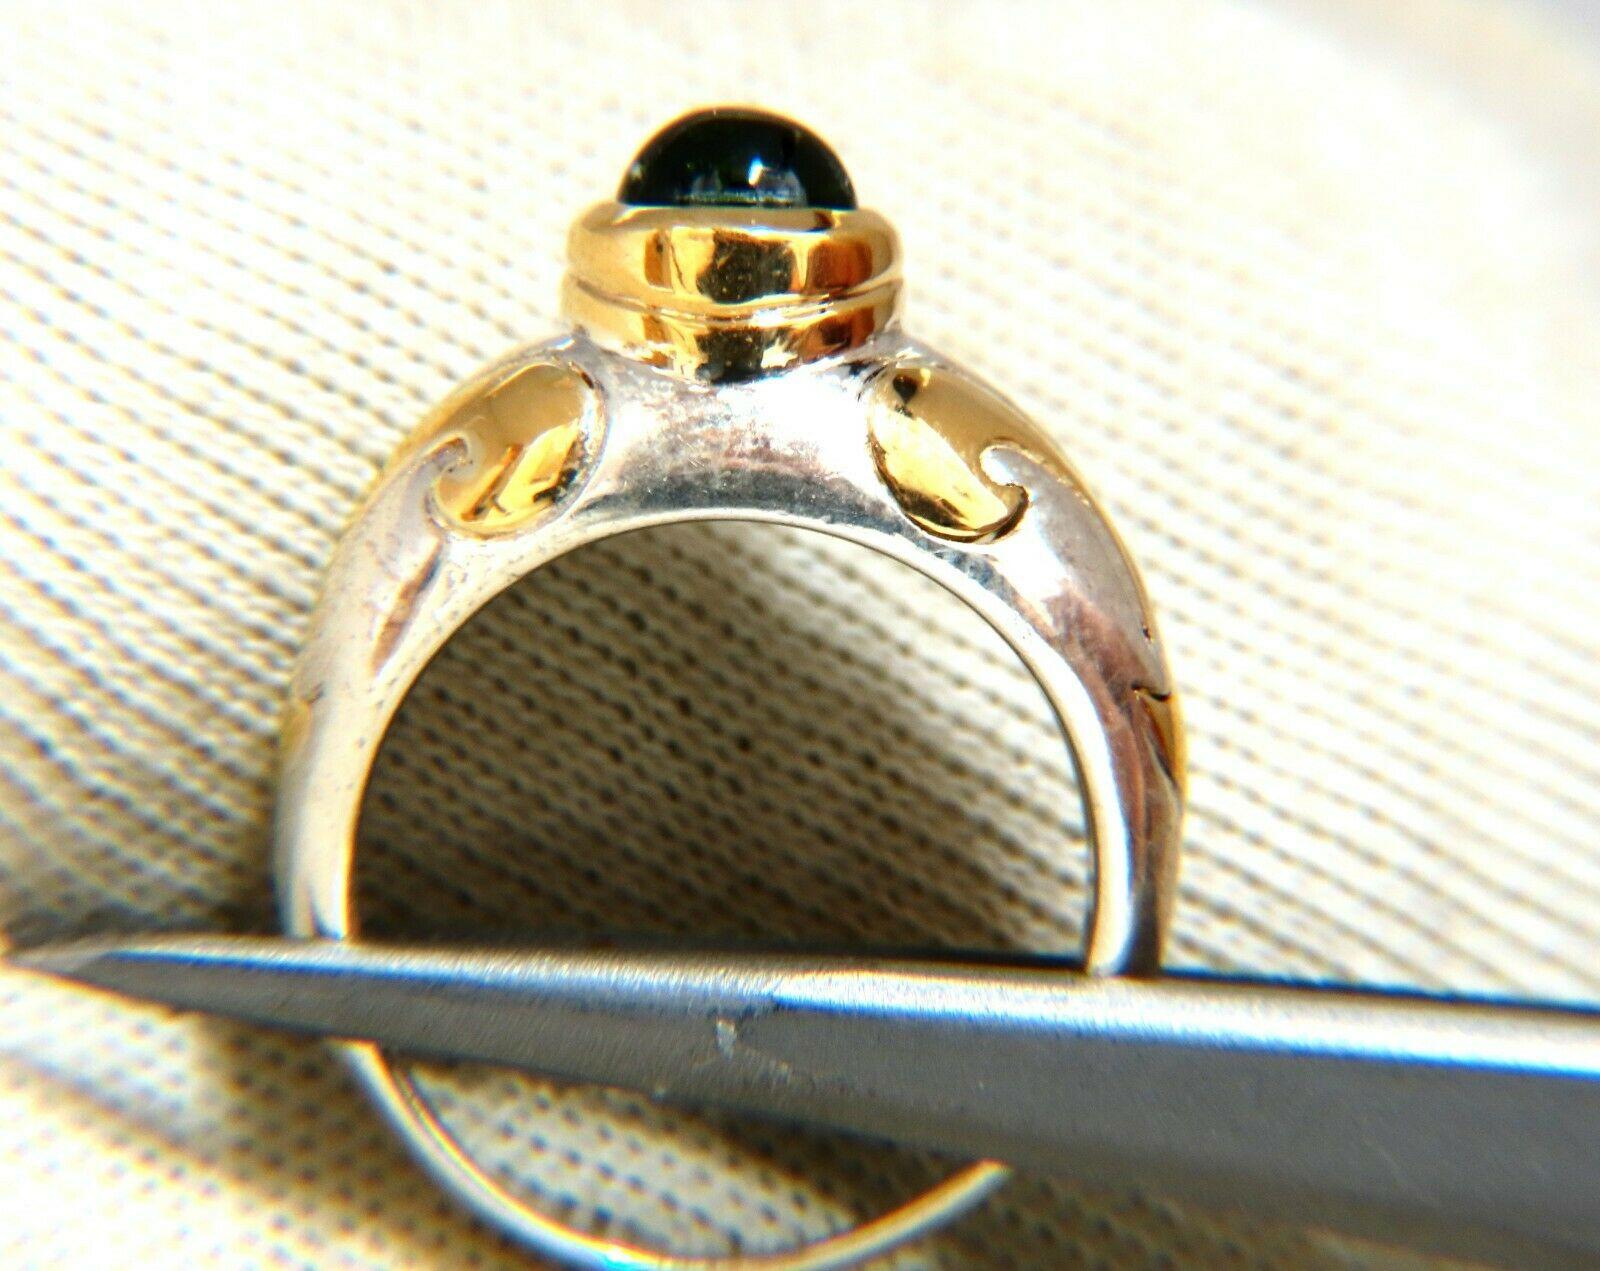 1 carat natural cabochon Green tourmaline ring

Tourmaline measures 5 mm diameter

Clean clarity and transparent


Total weight 7.2 g

Depth of ring 9.8 mm

Ring is 9.8 mm wide

Size 6 and 1/2 and we may resize

Ring composed of 18 karat gold and